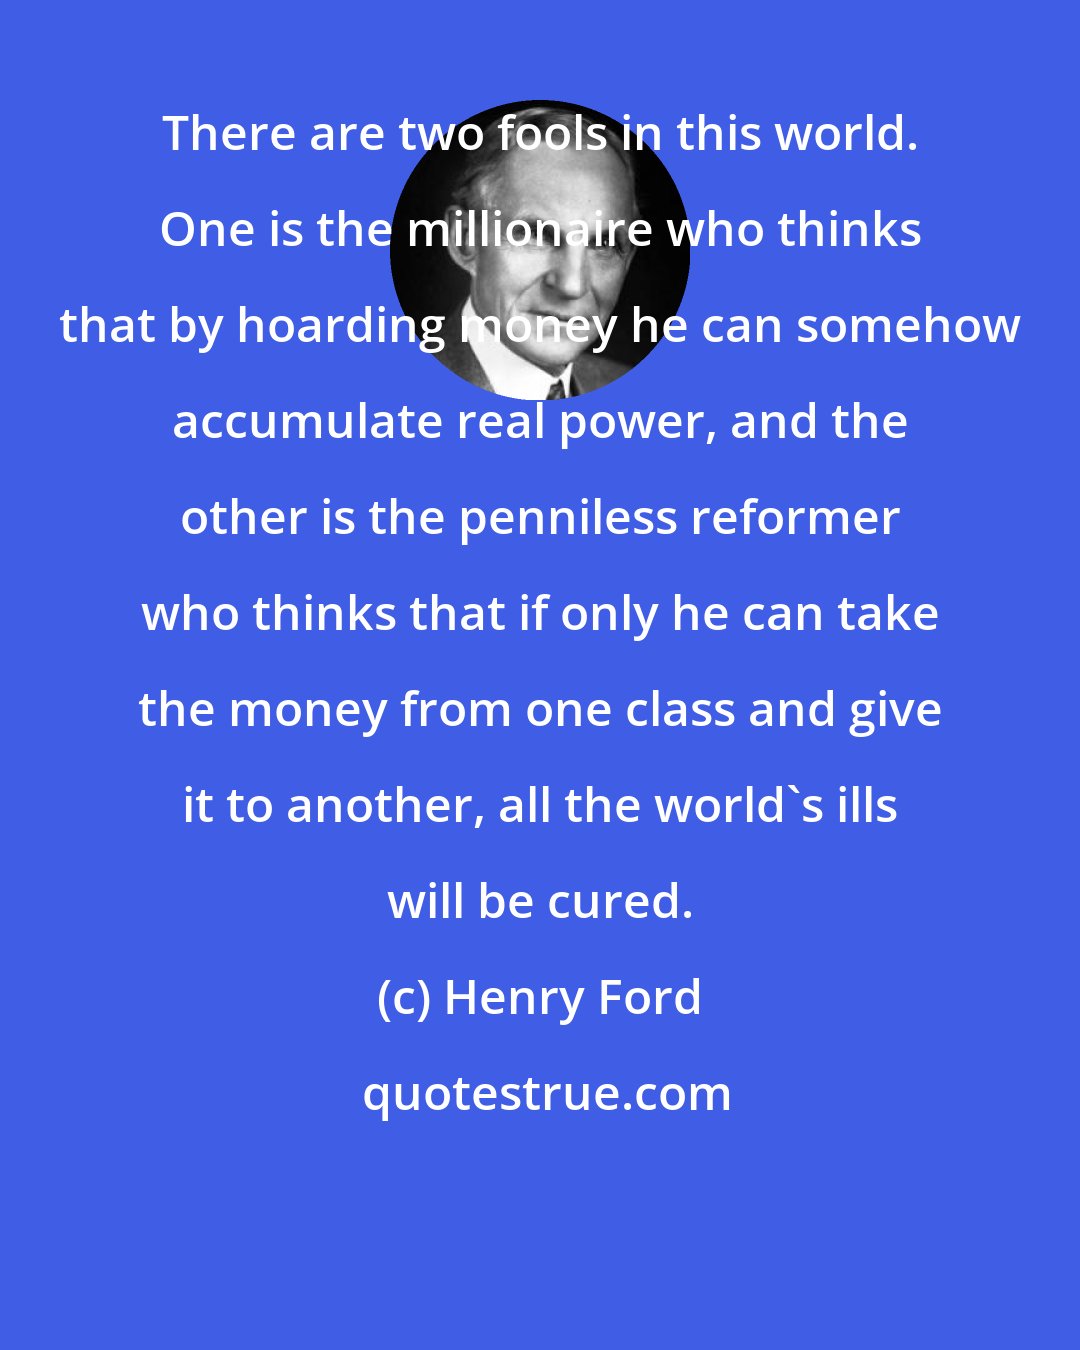 Henry Ford: There are two fools in this world. One is the millionaire who thinks that by hoarding money he can somehow accumulate real power, and the other is the penniless reformer who thinks that if only he can take the money from one class and give it to another, all the world's ills will be cured.